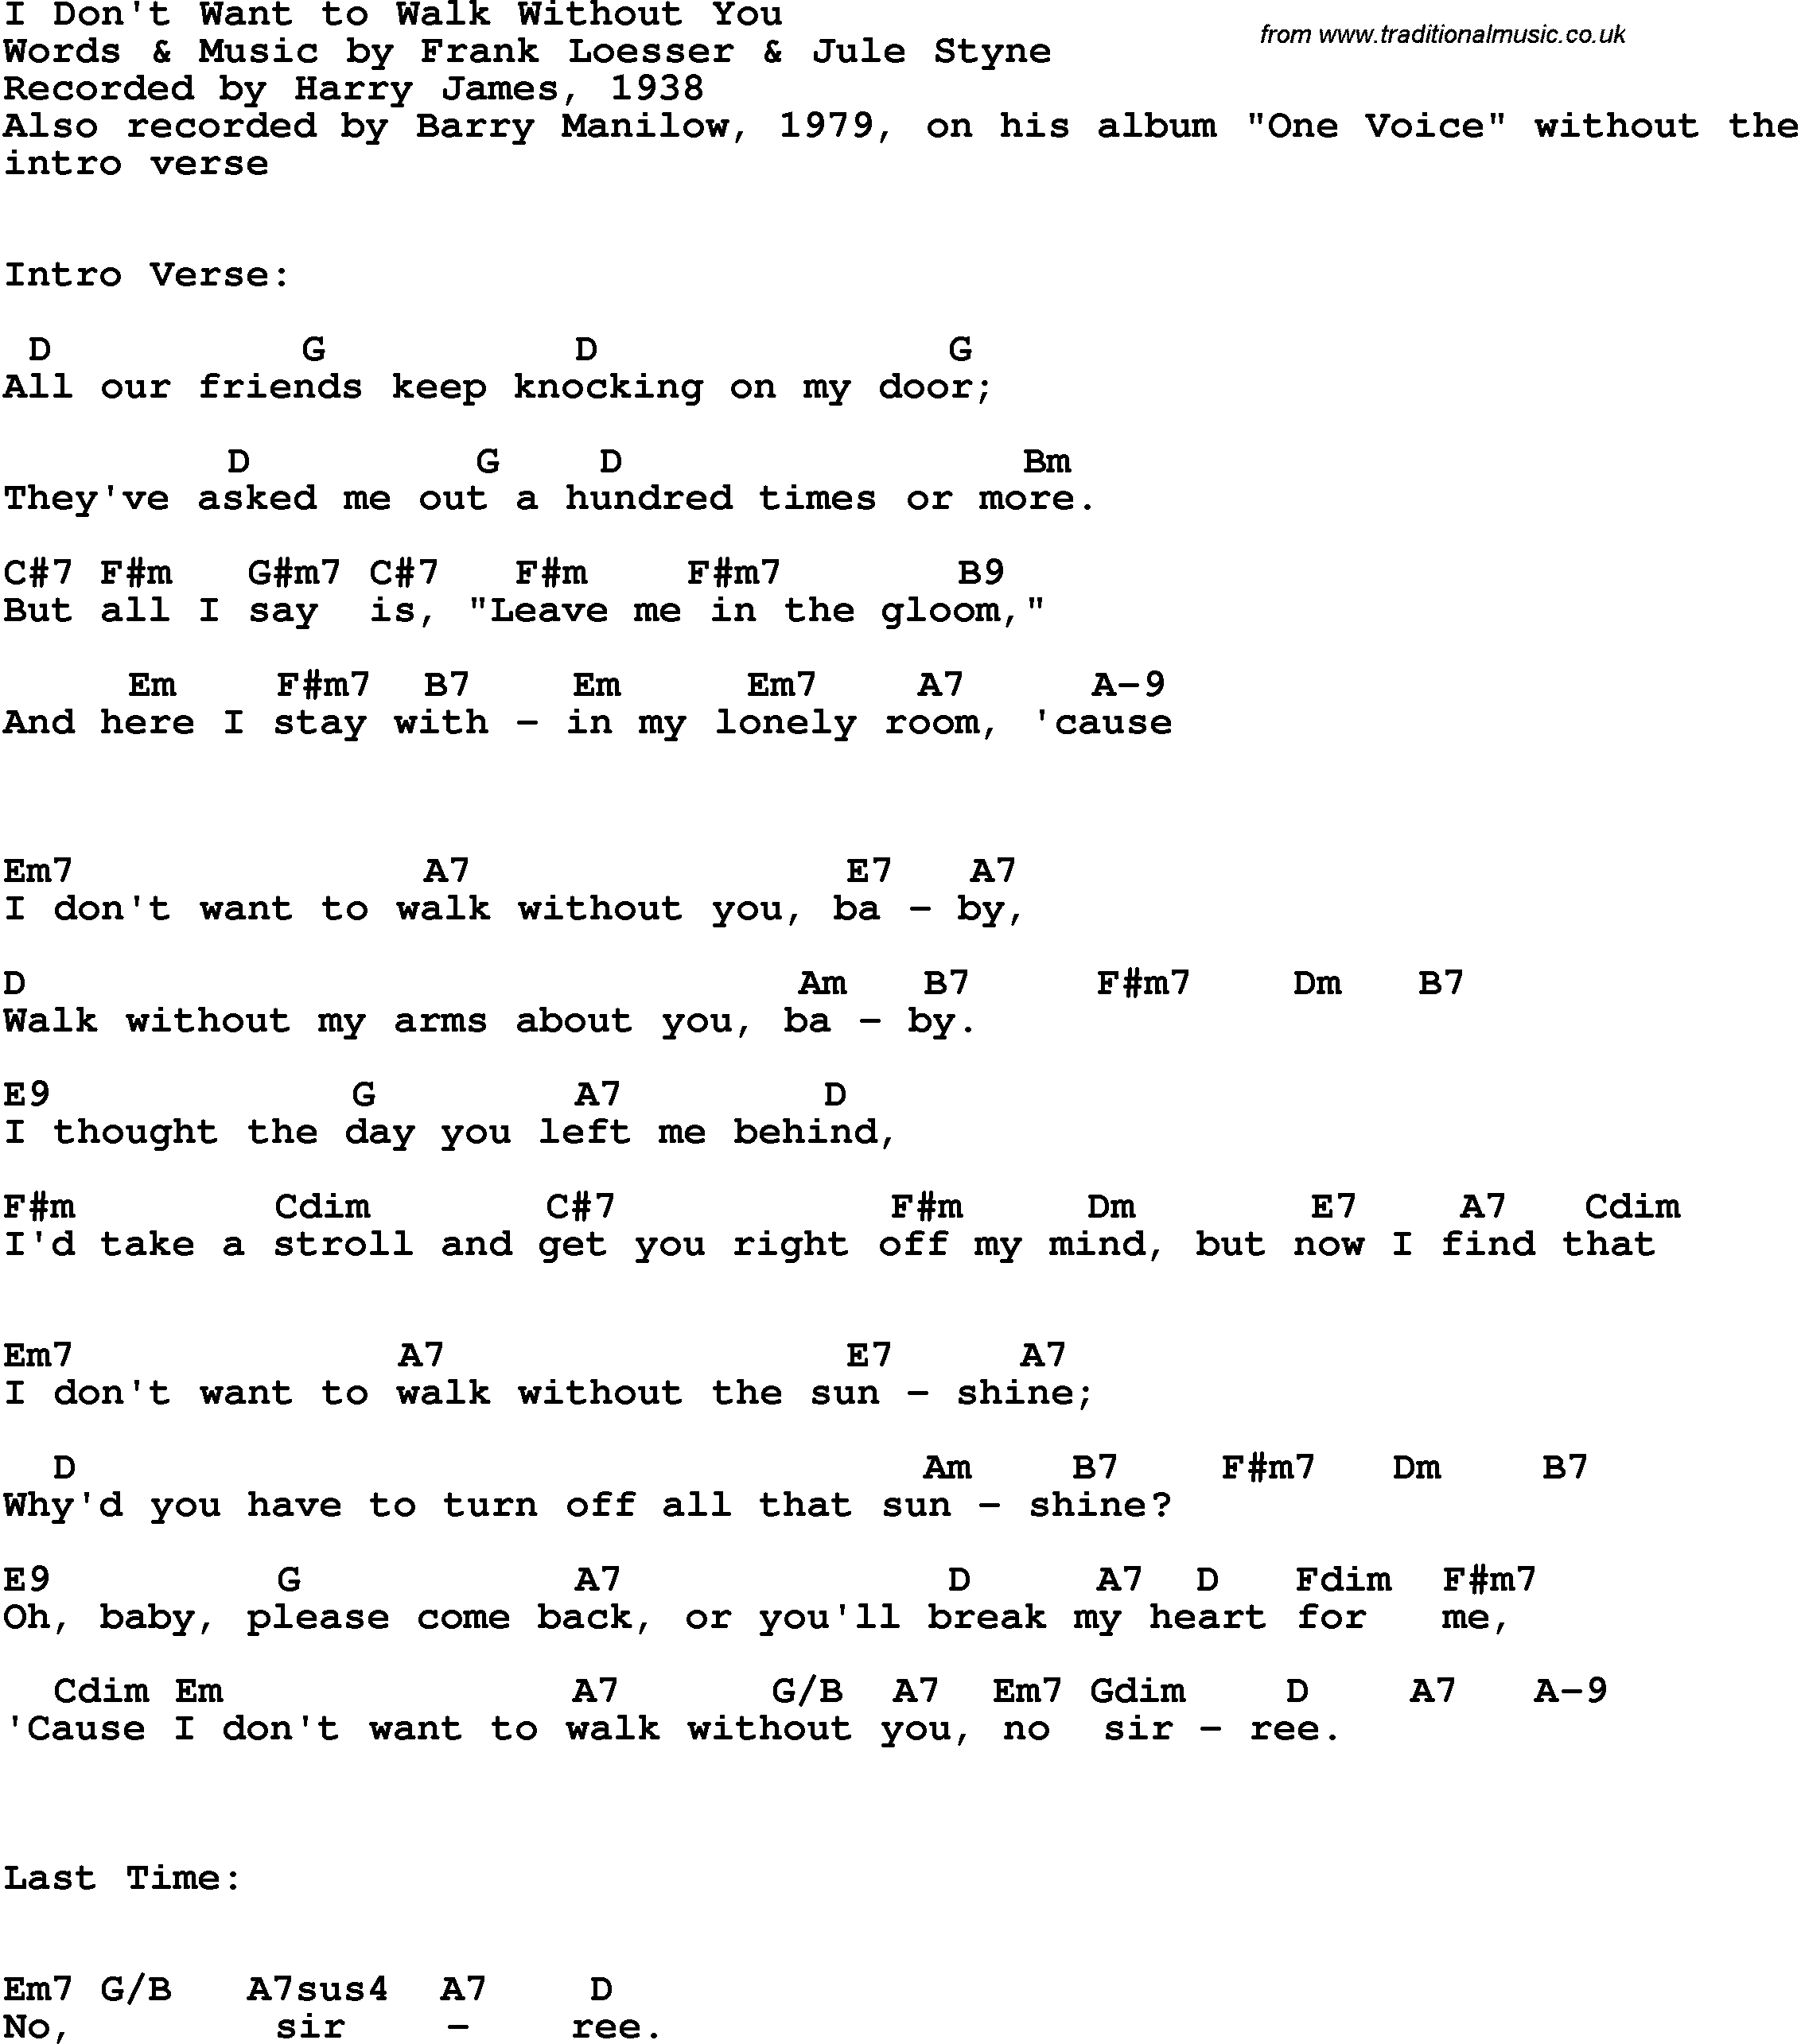 Song Lyrics with guitar chords for I Don't Want To Walk Without You - Harry James, 1938